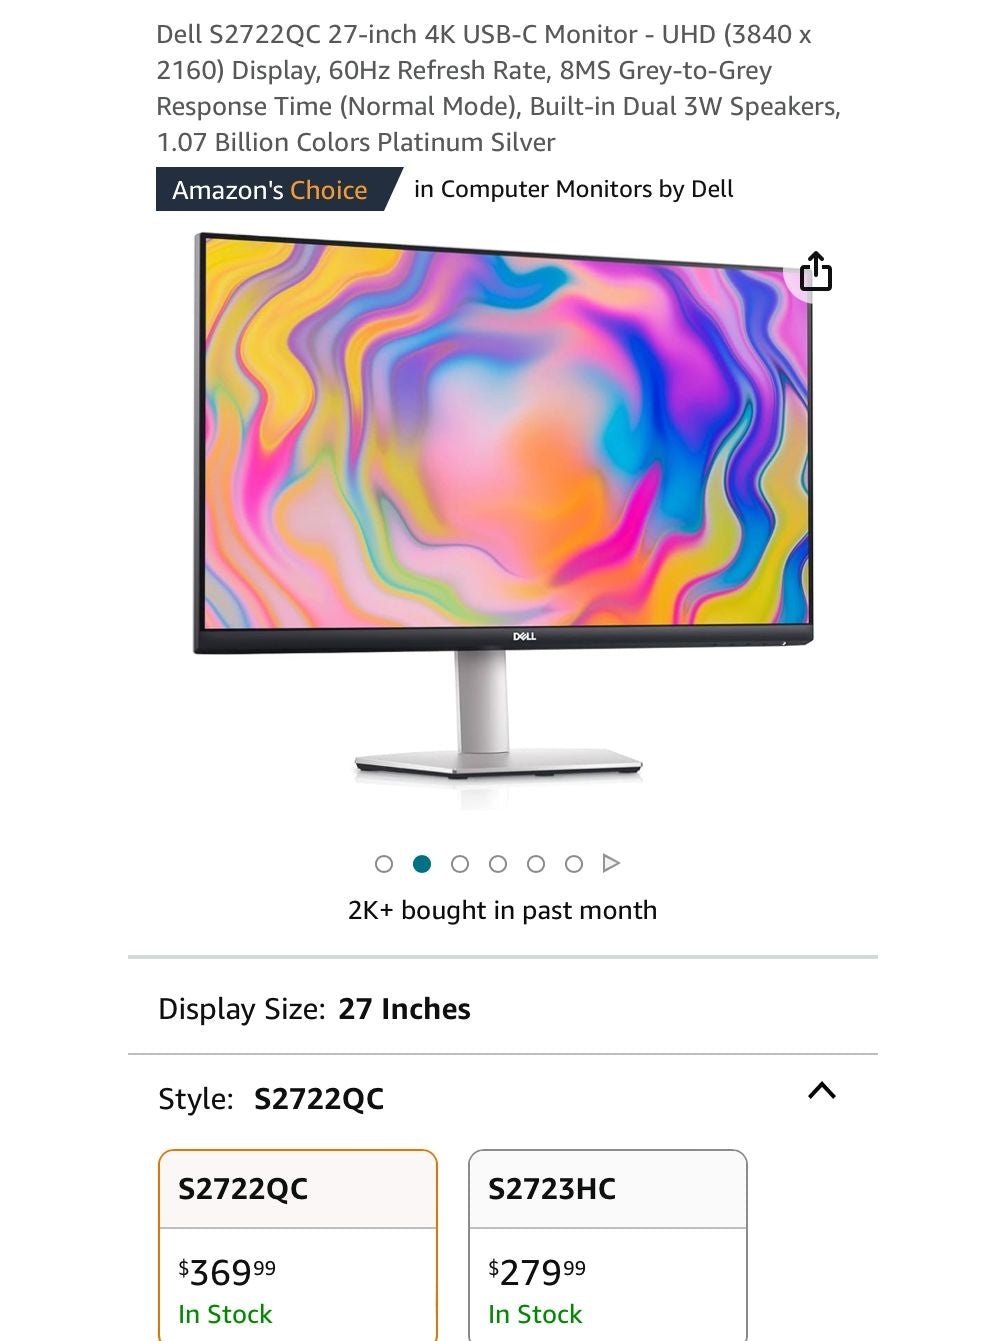 Dell S27220C 27-inch 4K USB-C Monitor - UHD (3840 x
2160) Display, 60Hz Refresh Rate, 8MS Grey-to-Grey Response Time (Normal Mode), Built-in Dual 3W Speakers,
1.07 Billion Colors Platinum Silver